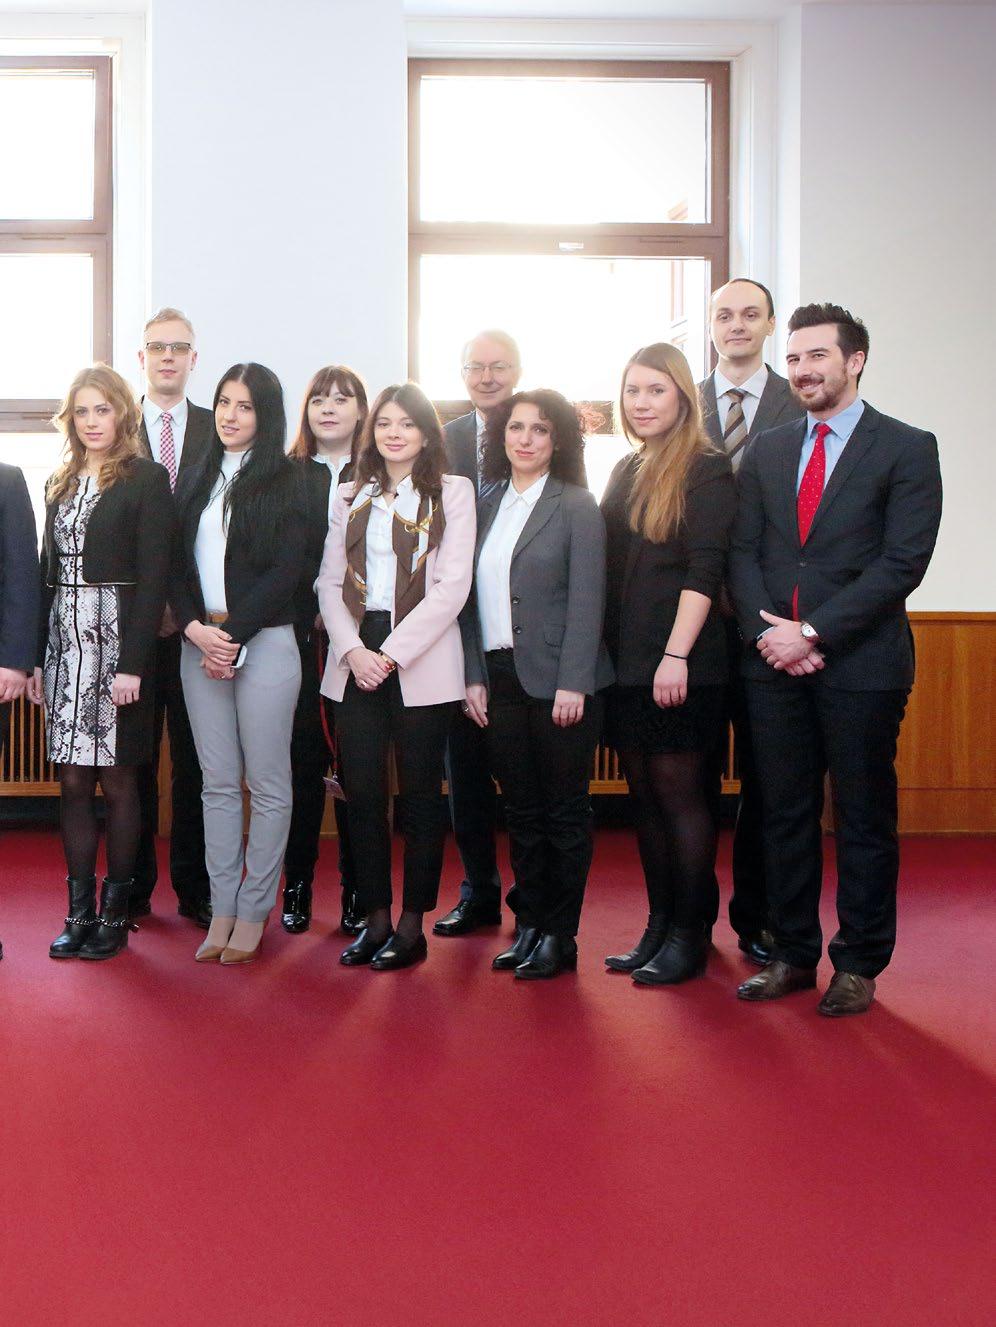 Executive Seminar for Diplomats from the Western Balkans 15 6 th Executive Seminar for Diplomats from the Western Balkans 22 February 18 March 2016 1 st row, from left to right: Marlena Markovic,